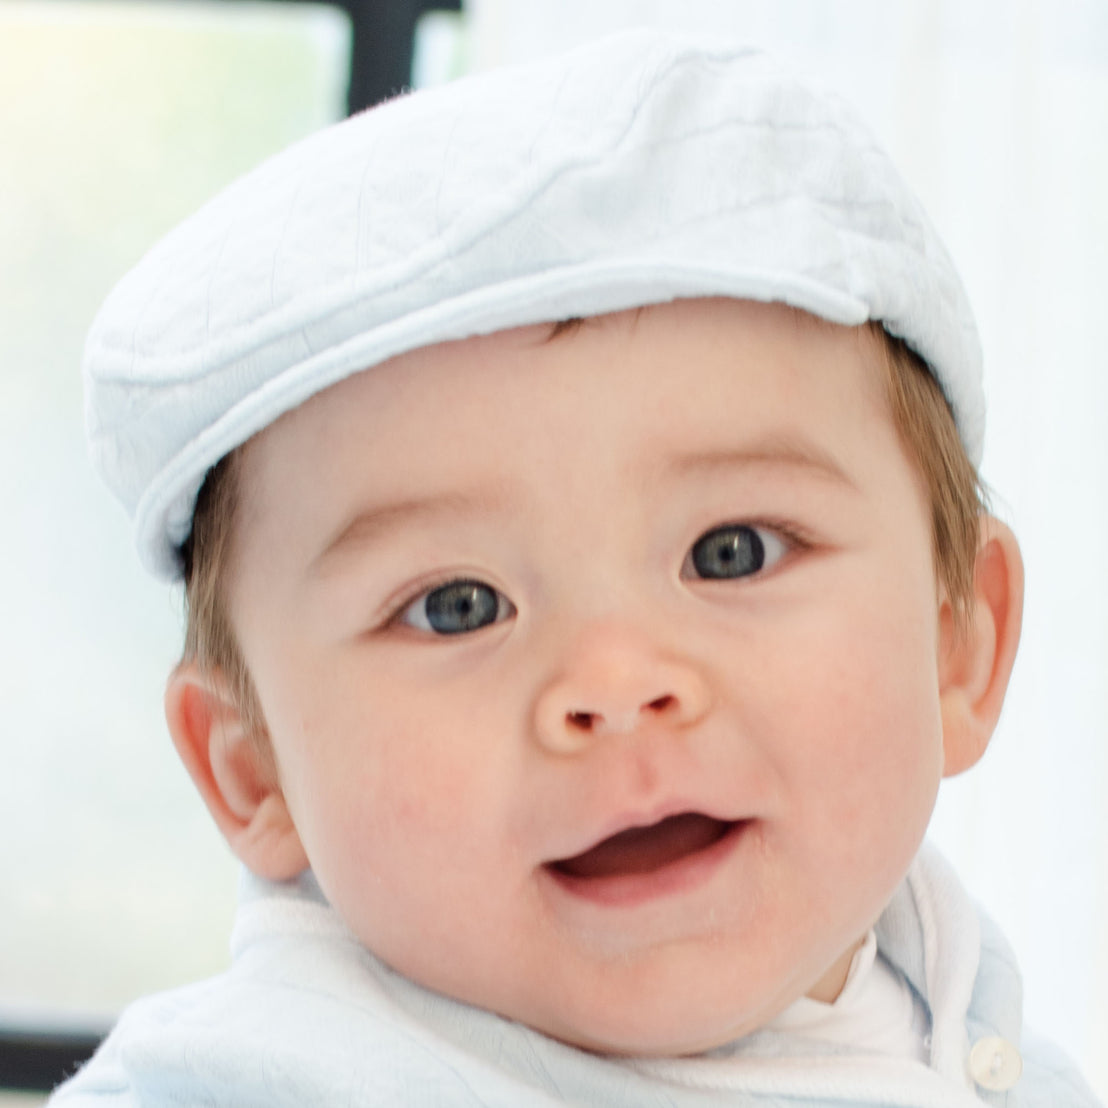 Baby boy smiling and wearing the Logan Newsboy Cap.